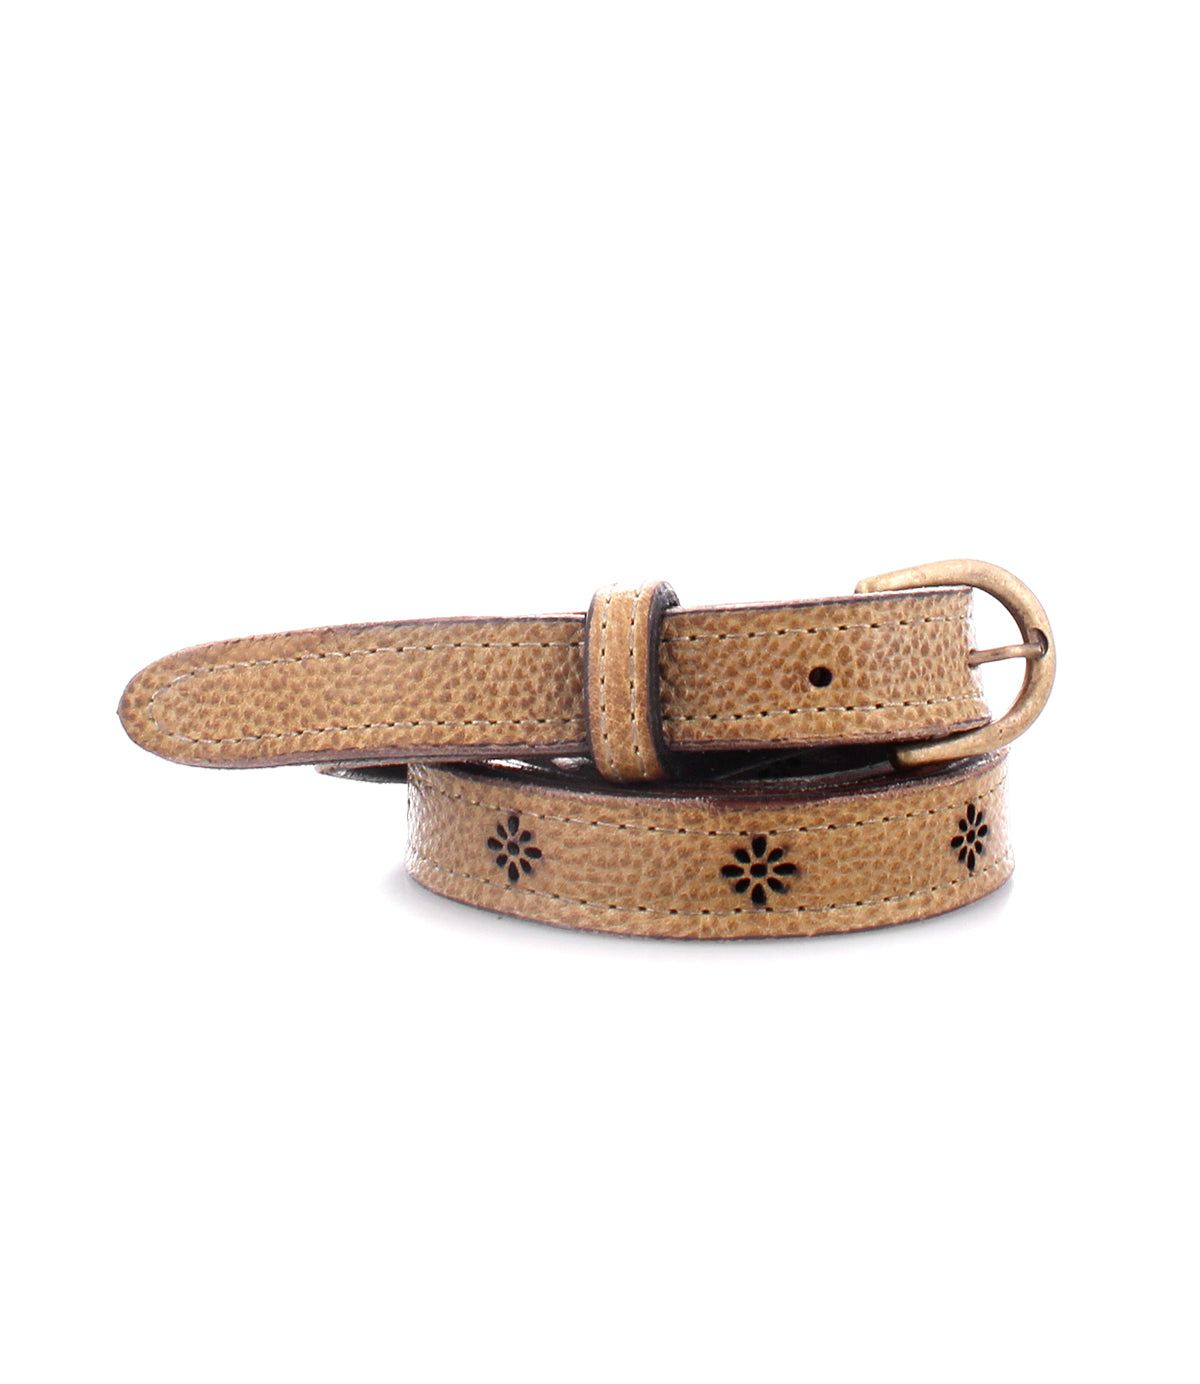 This Monae II leather belt is the perfect accessory, featuring beautiful flowers in a tan color.